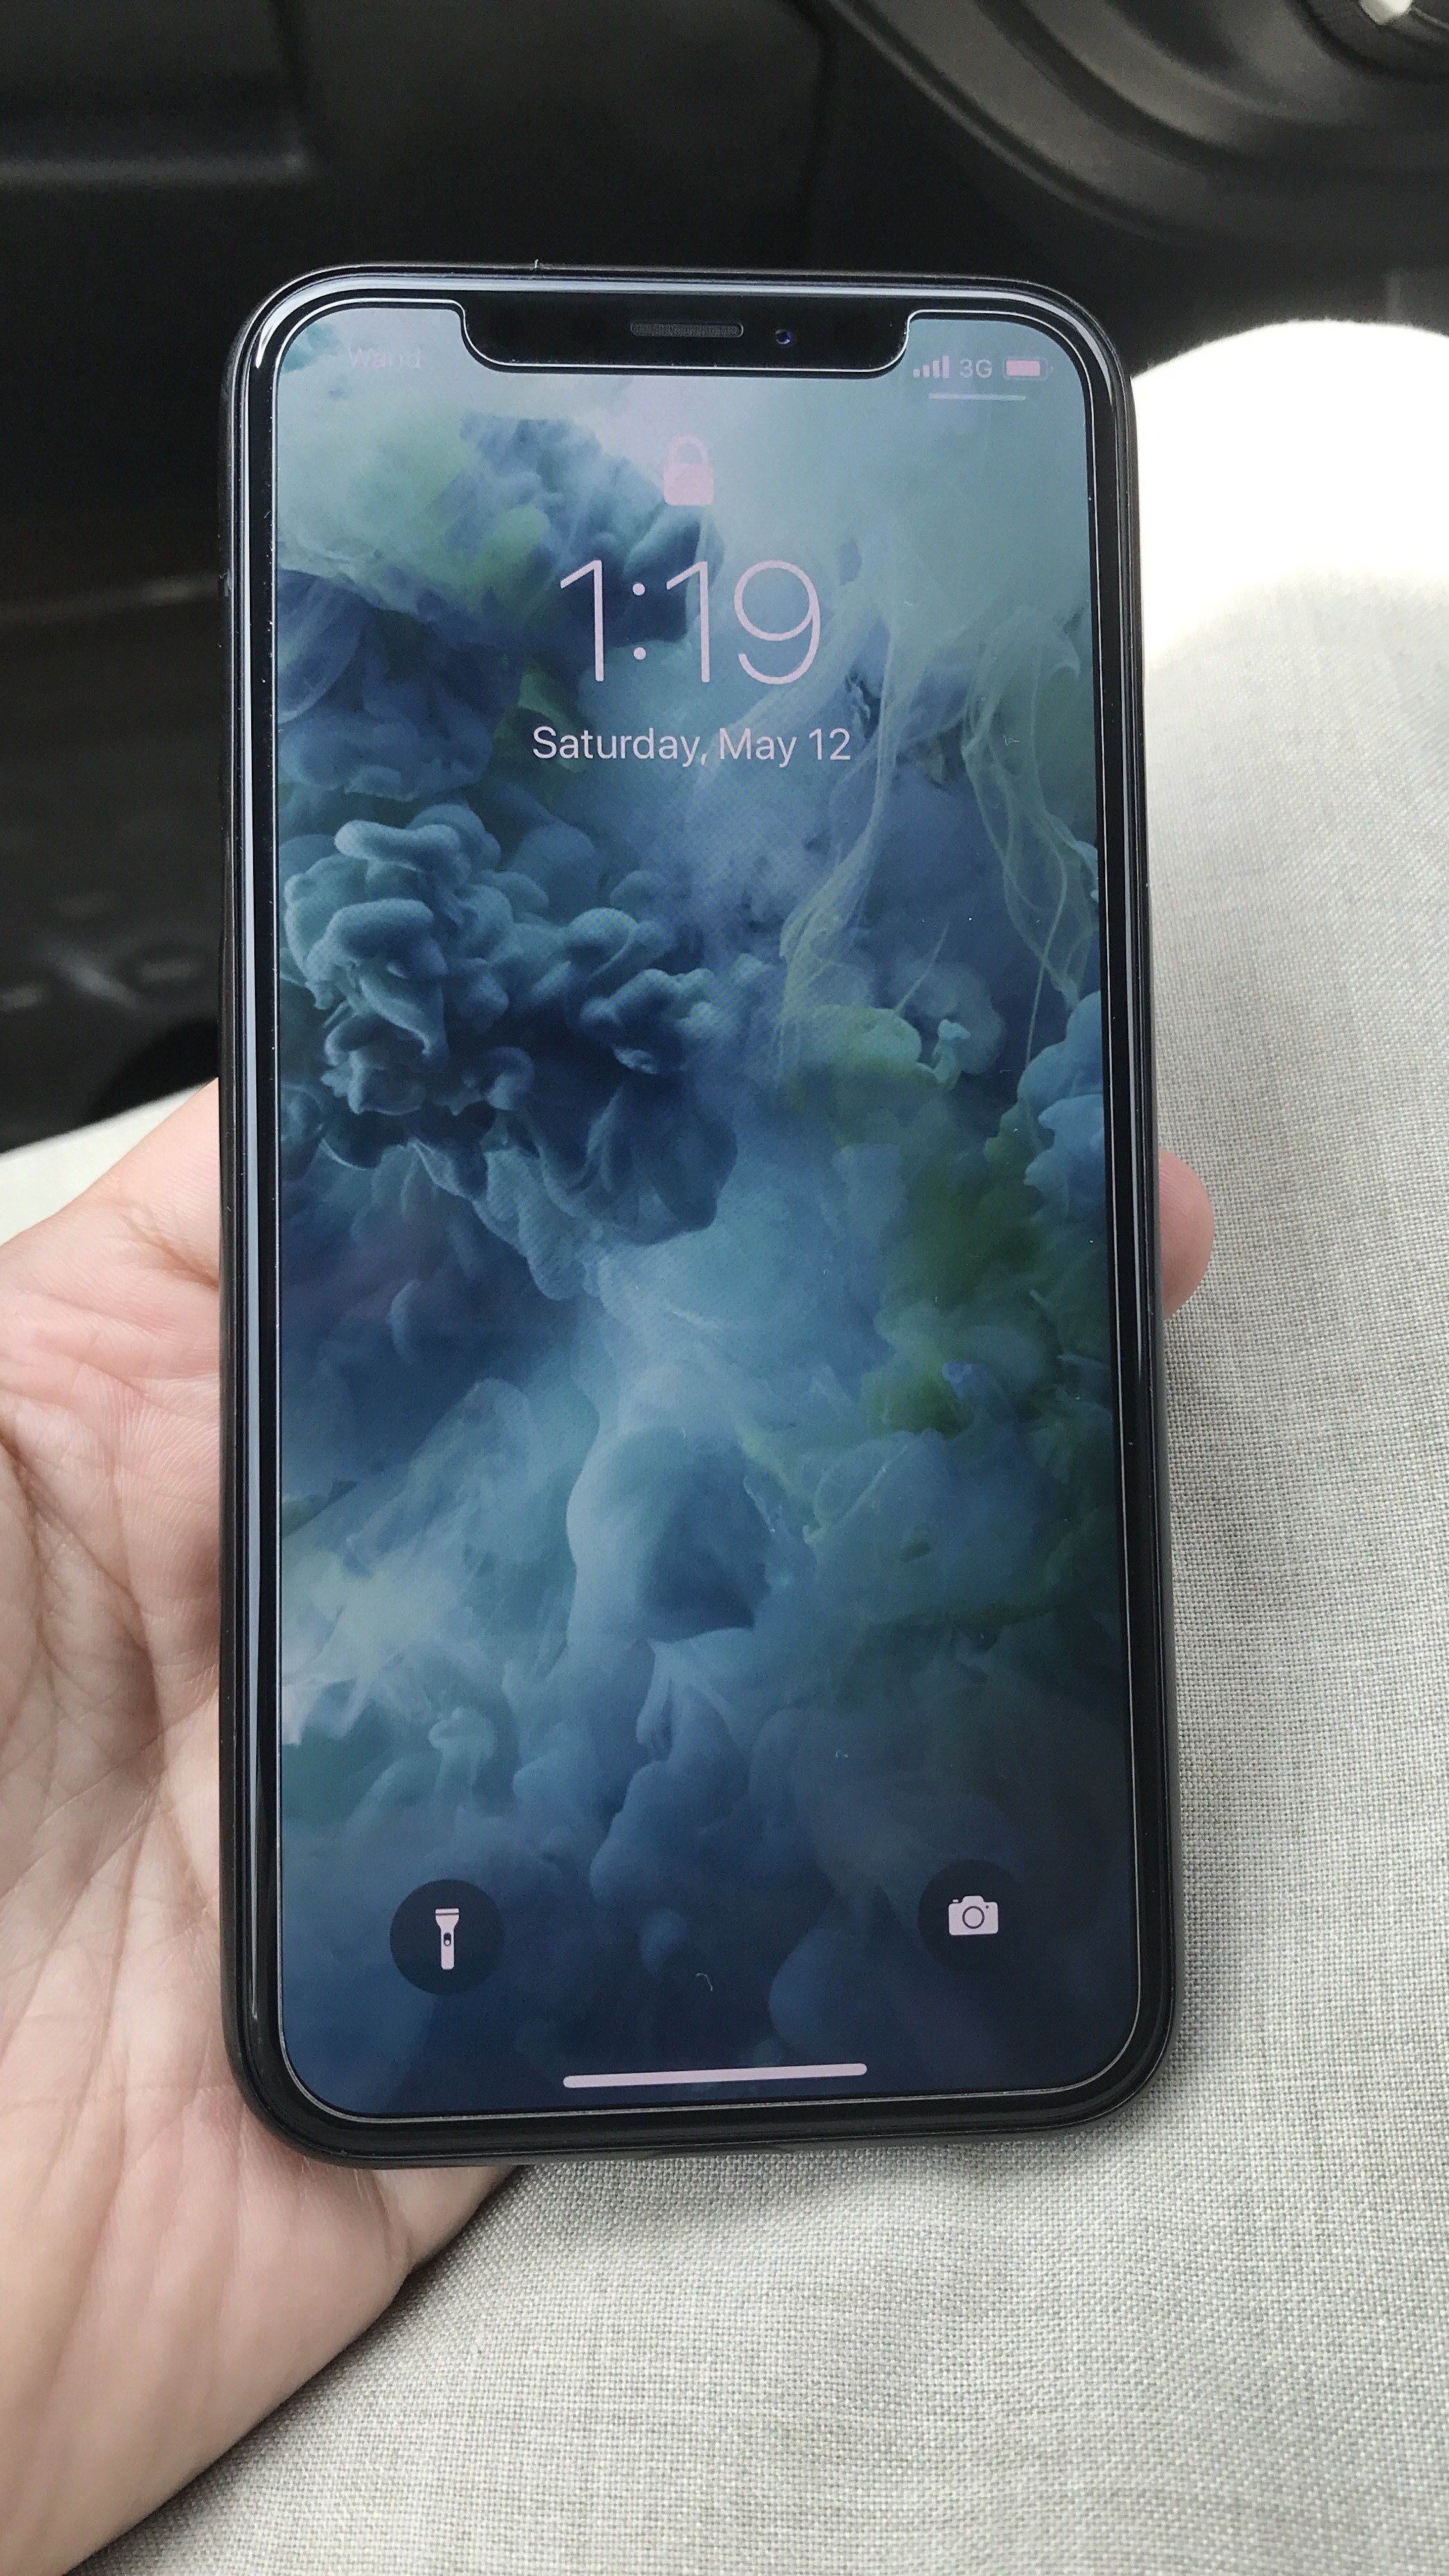 iPhone X 64gb Space Gray - Non-Auto Related Stuff - PakWheels Forums